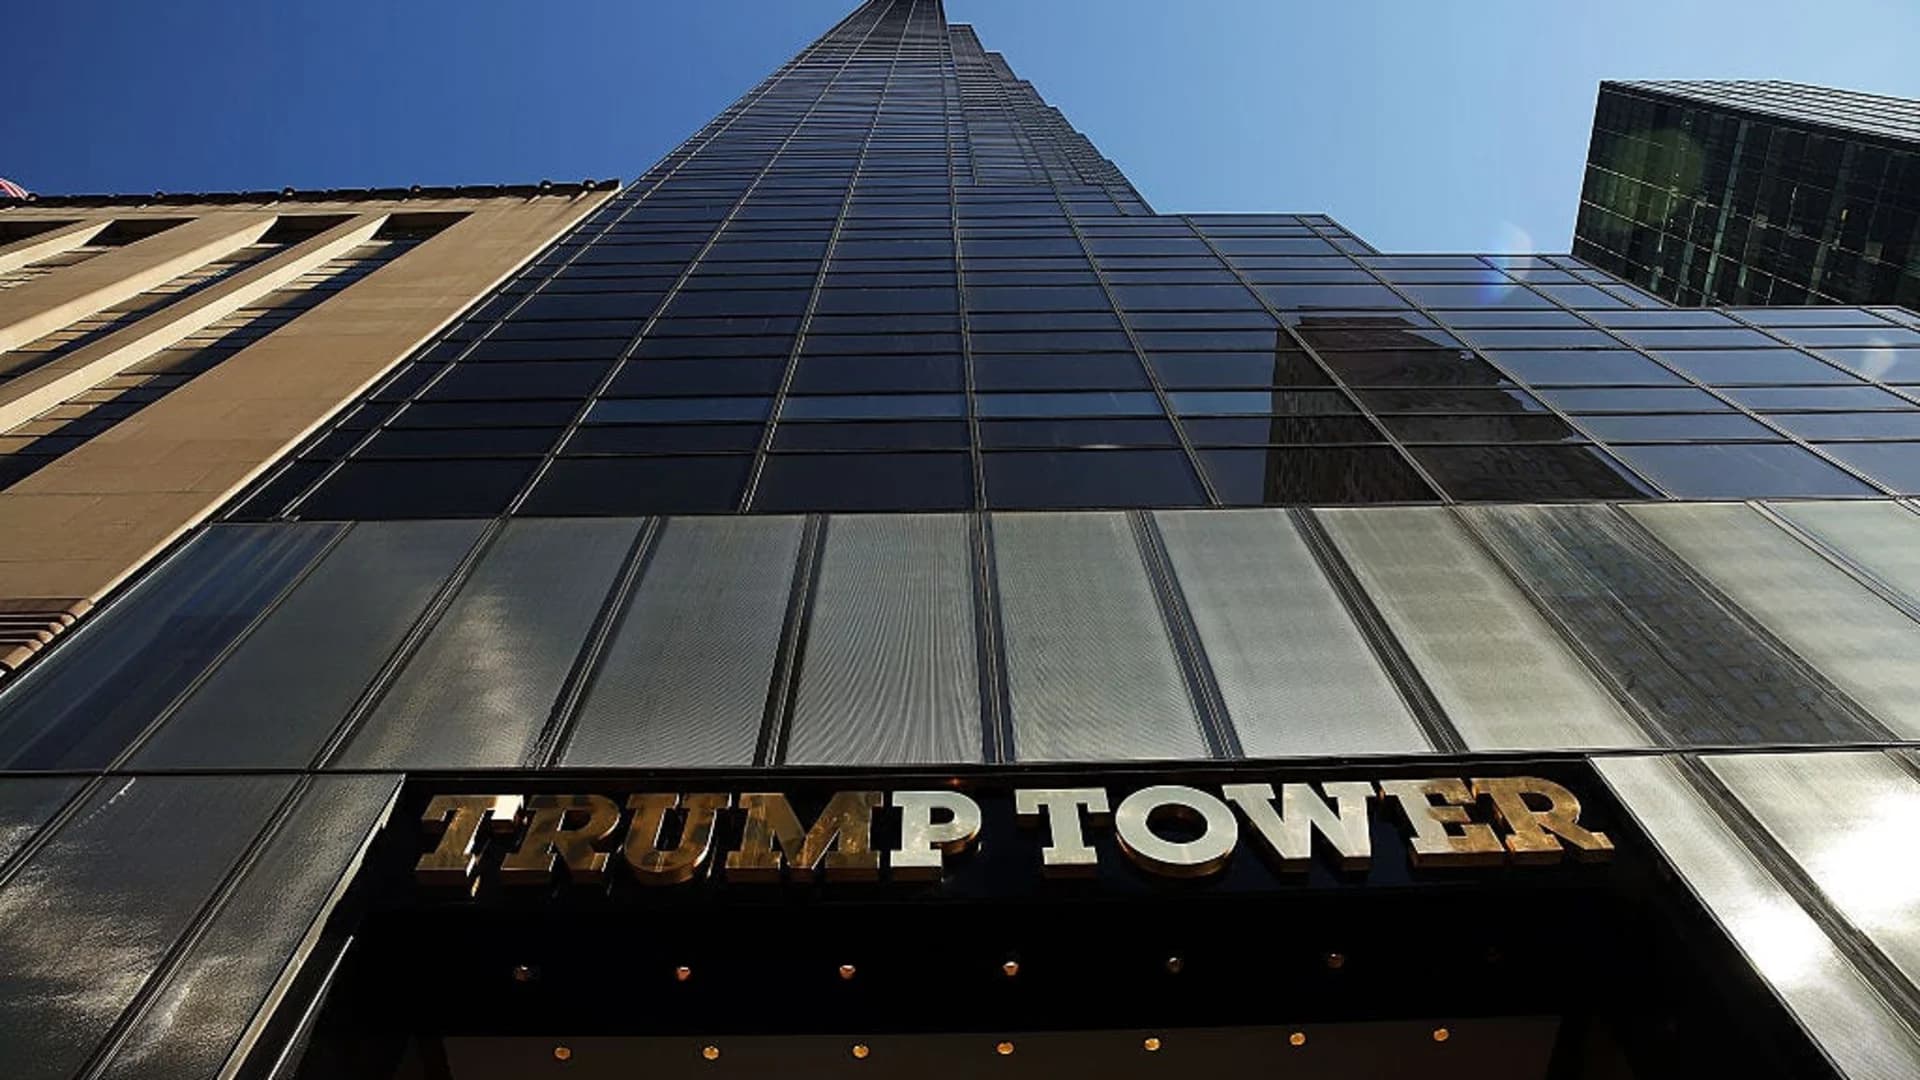 Police say 'suspicious item' at Trump Tower deemed safe